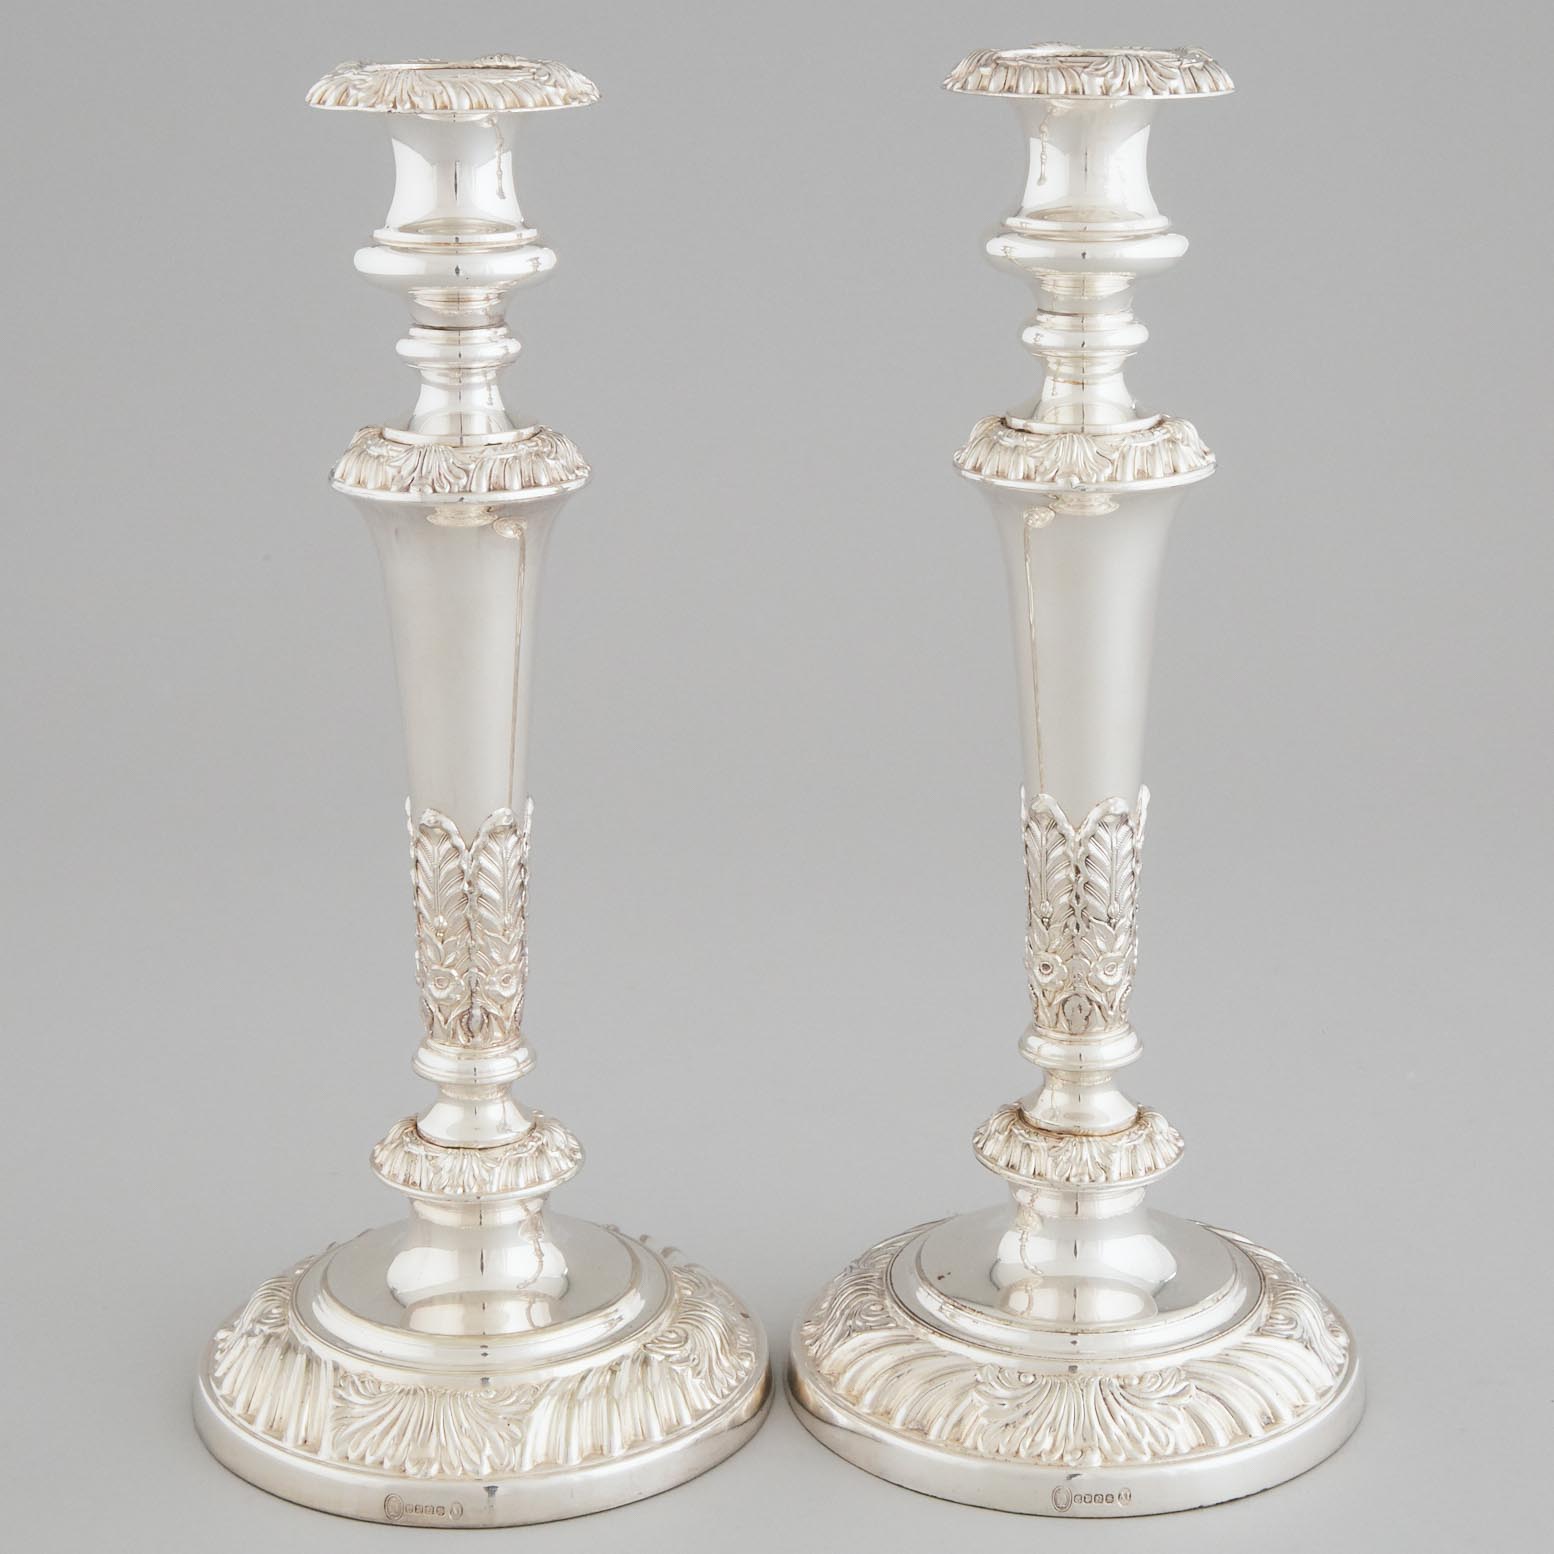 Pair of English Silver Plated Table